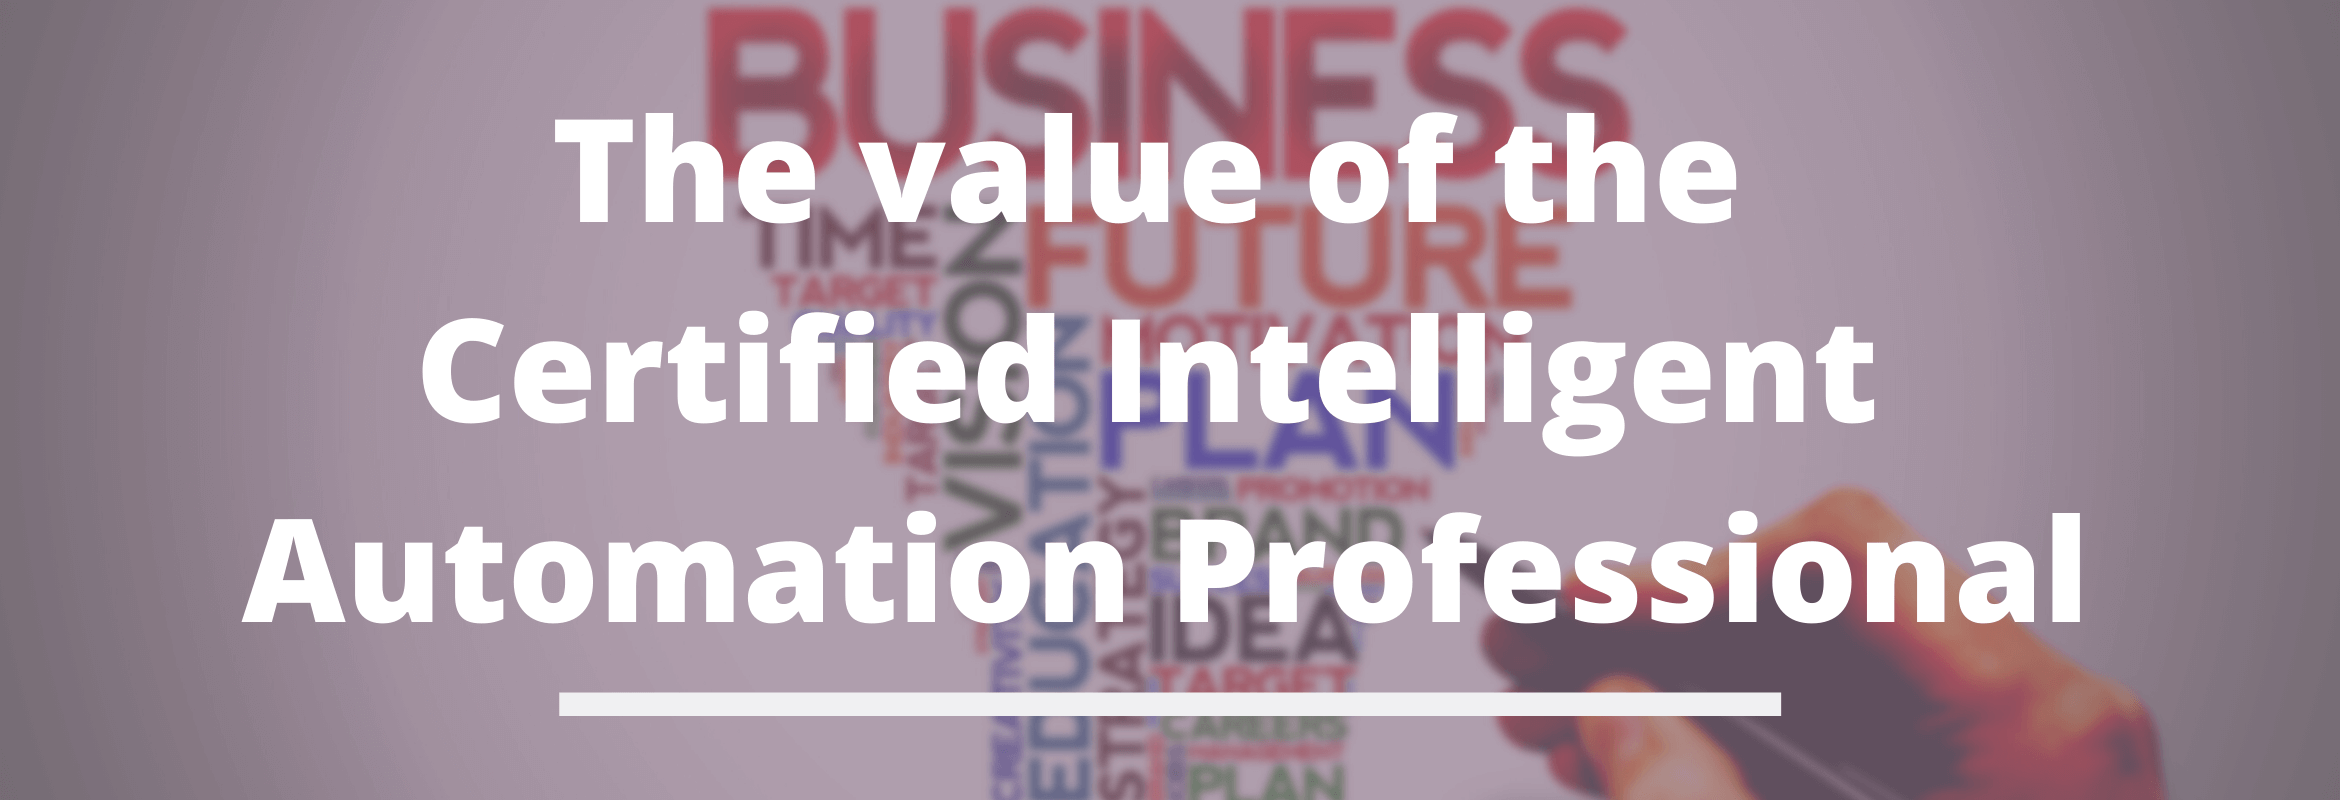 Image of Certified Intelligent Automation Professional 